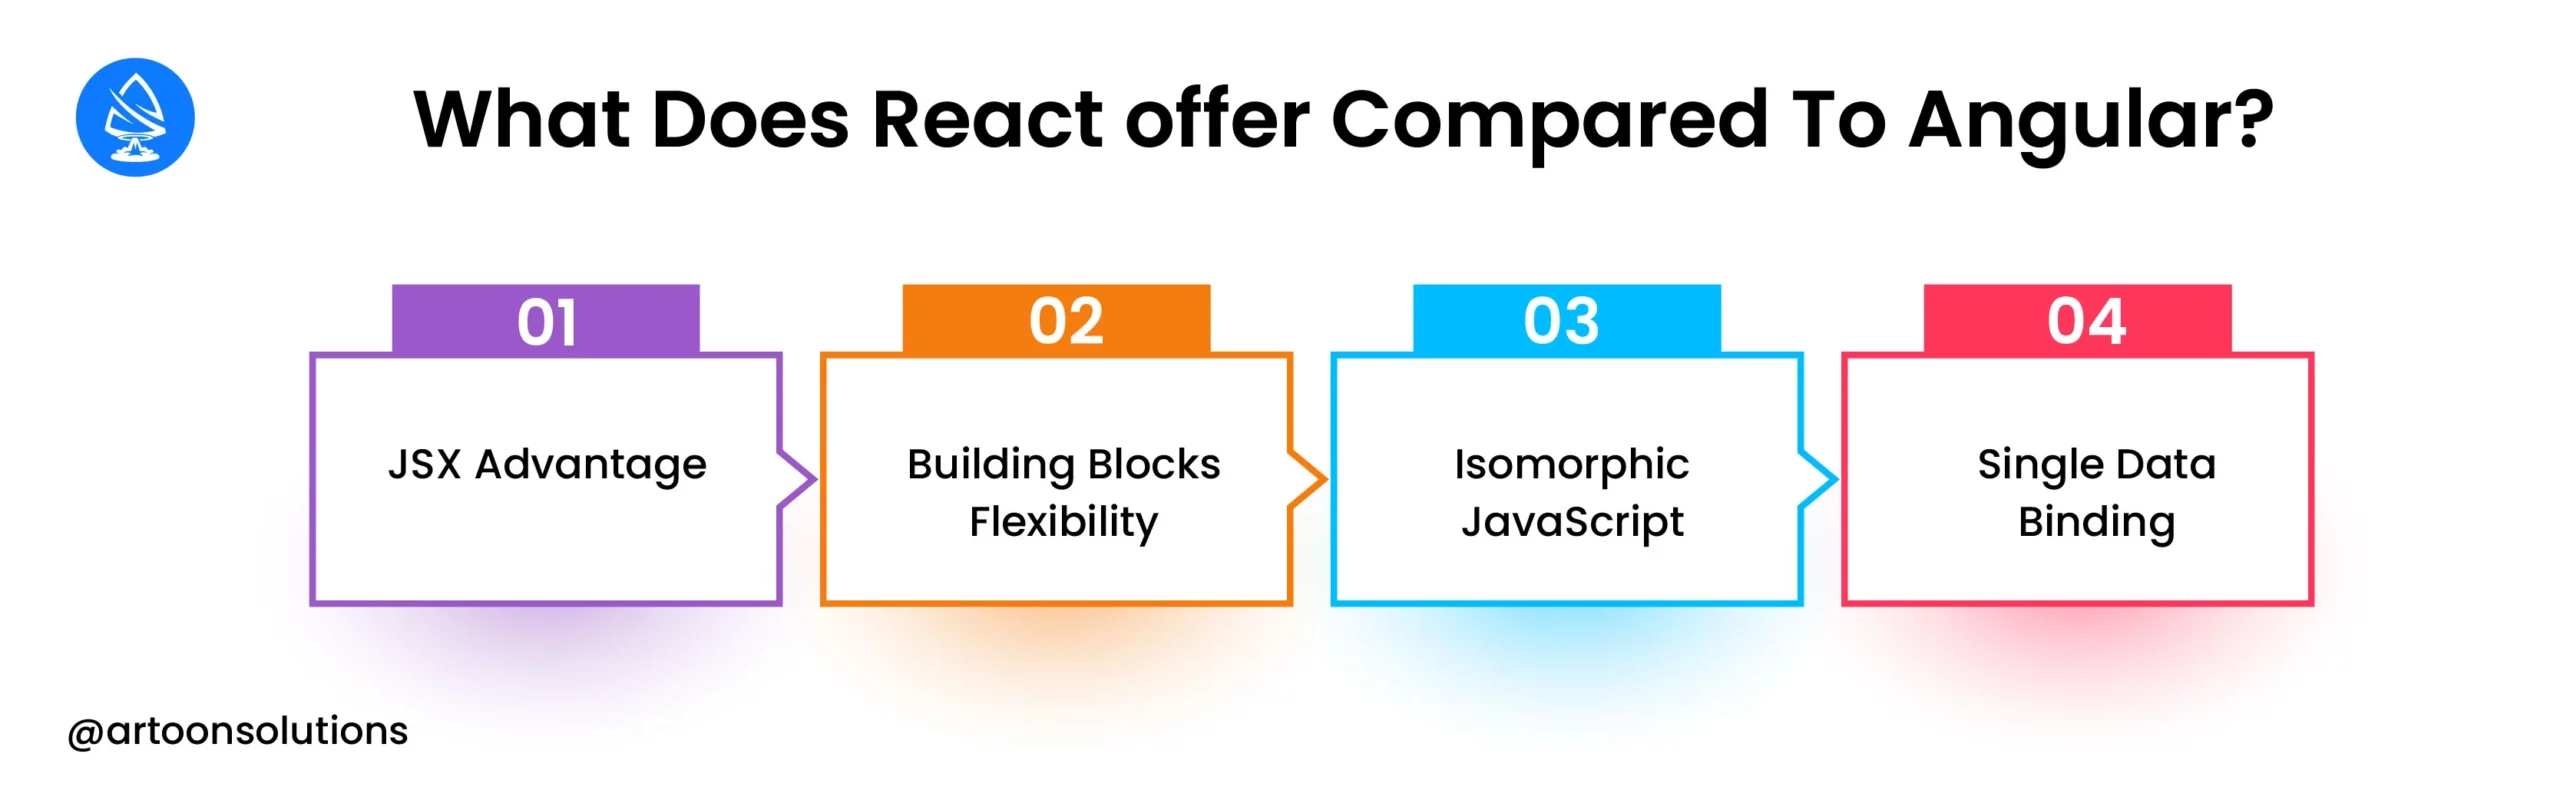 What does React offer compared to Angular